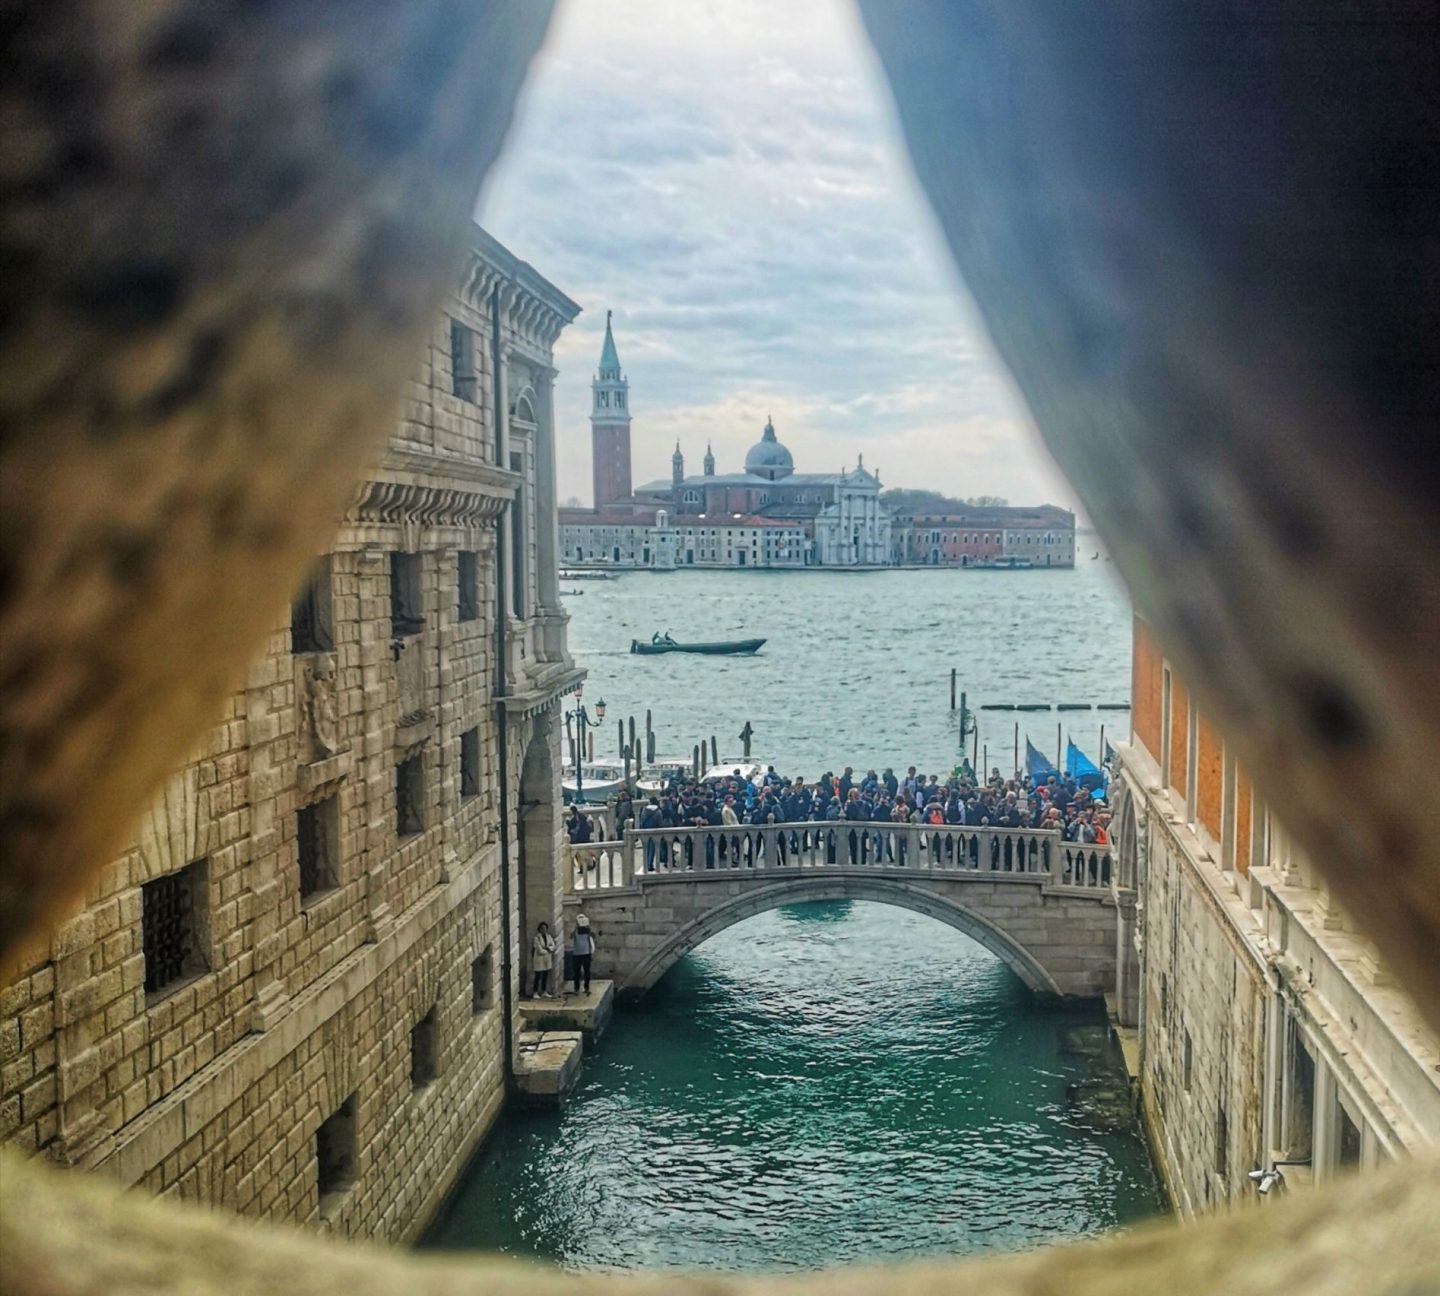 New Shades of Hippy - Anneka Nicholls - travel blog and green living - 24 hours in Venice, Italy - Inside the Bridge of Sighs, Venice